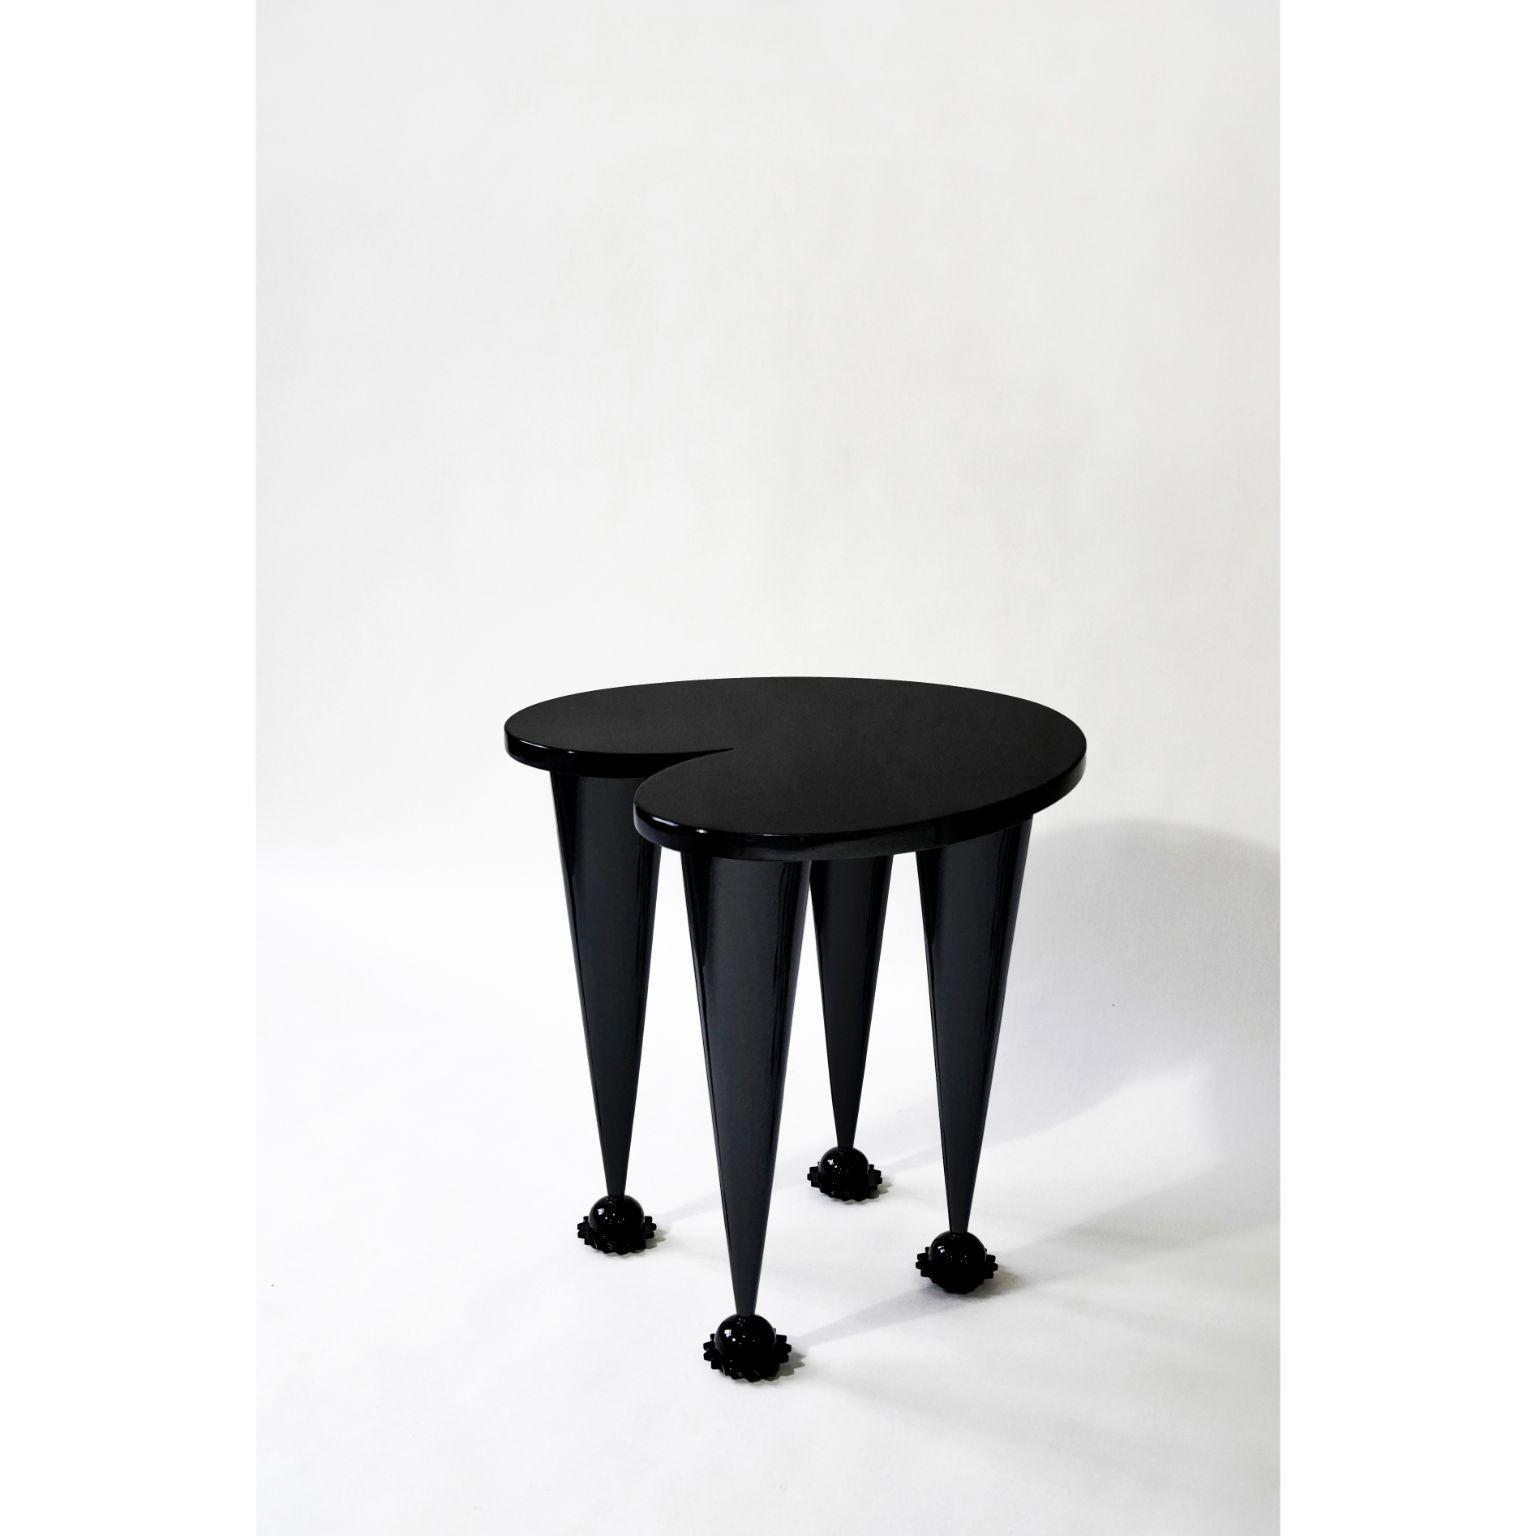 Burning Memories All Black Stool by The Shaw
Dimensions: D46 x W 44 x H45 cm
Materials: Stainless Steel, Wood
Weight: 8 kg

BURNING MEMORIES is a stage play released by THESHAW2021 in which red and black overlap. The side stool is steadily